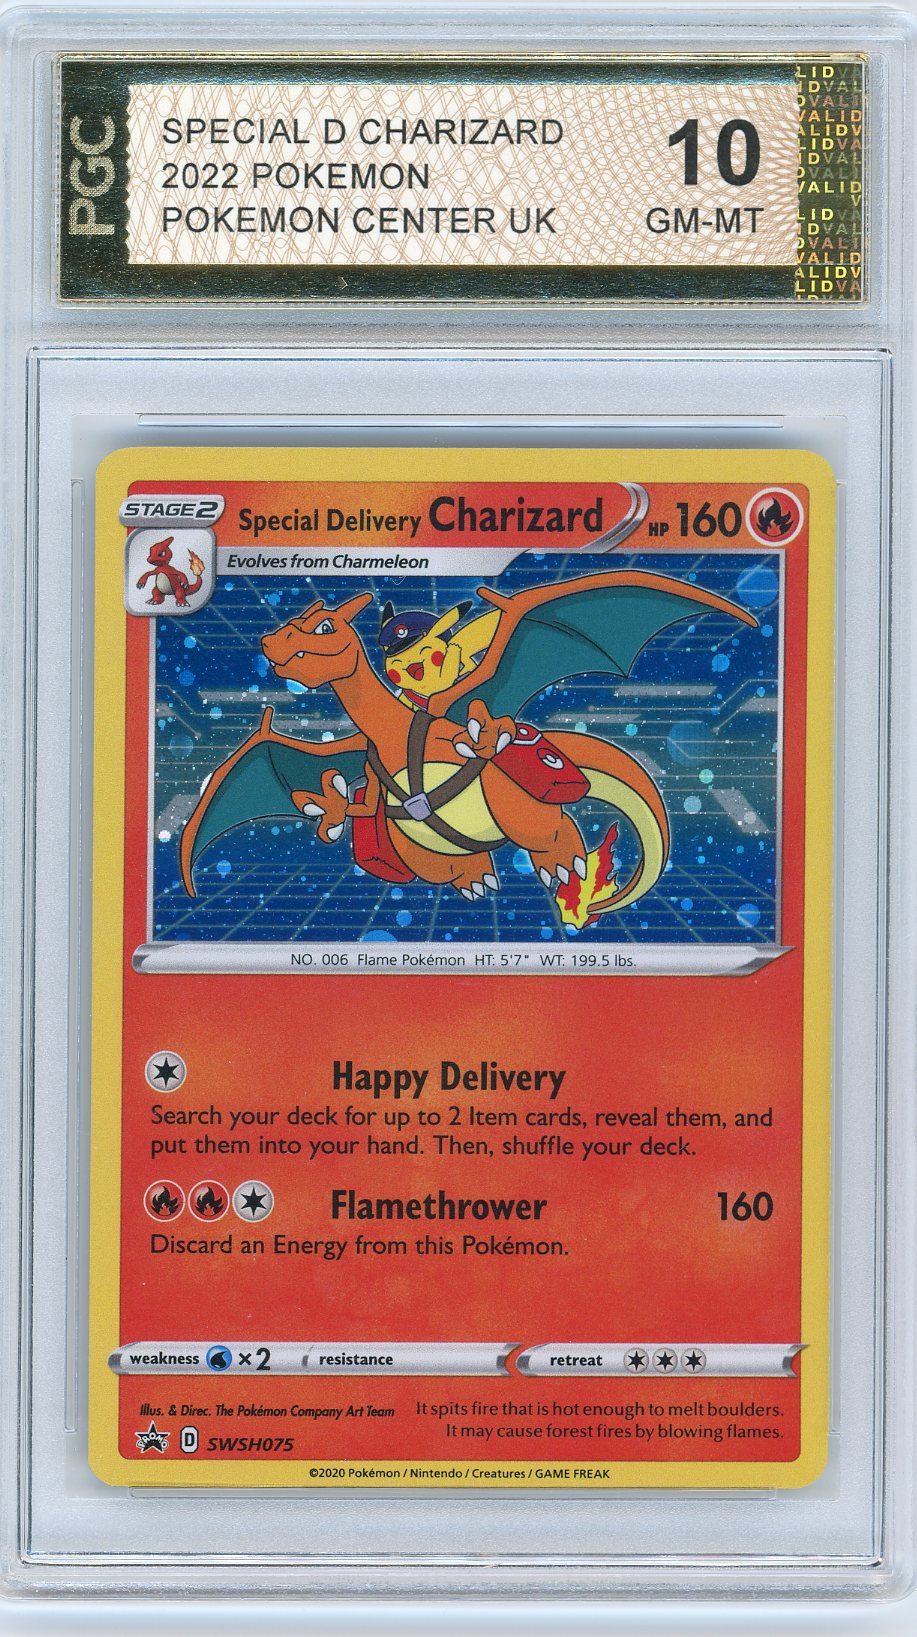 SPECIAL D CHARIZARD